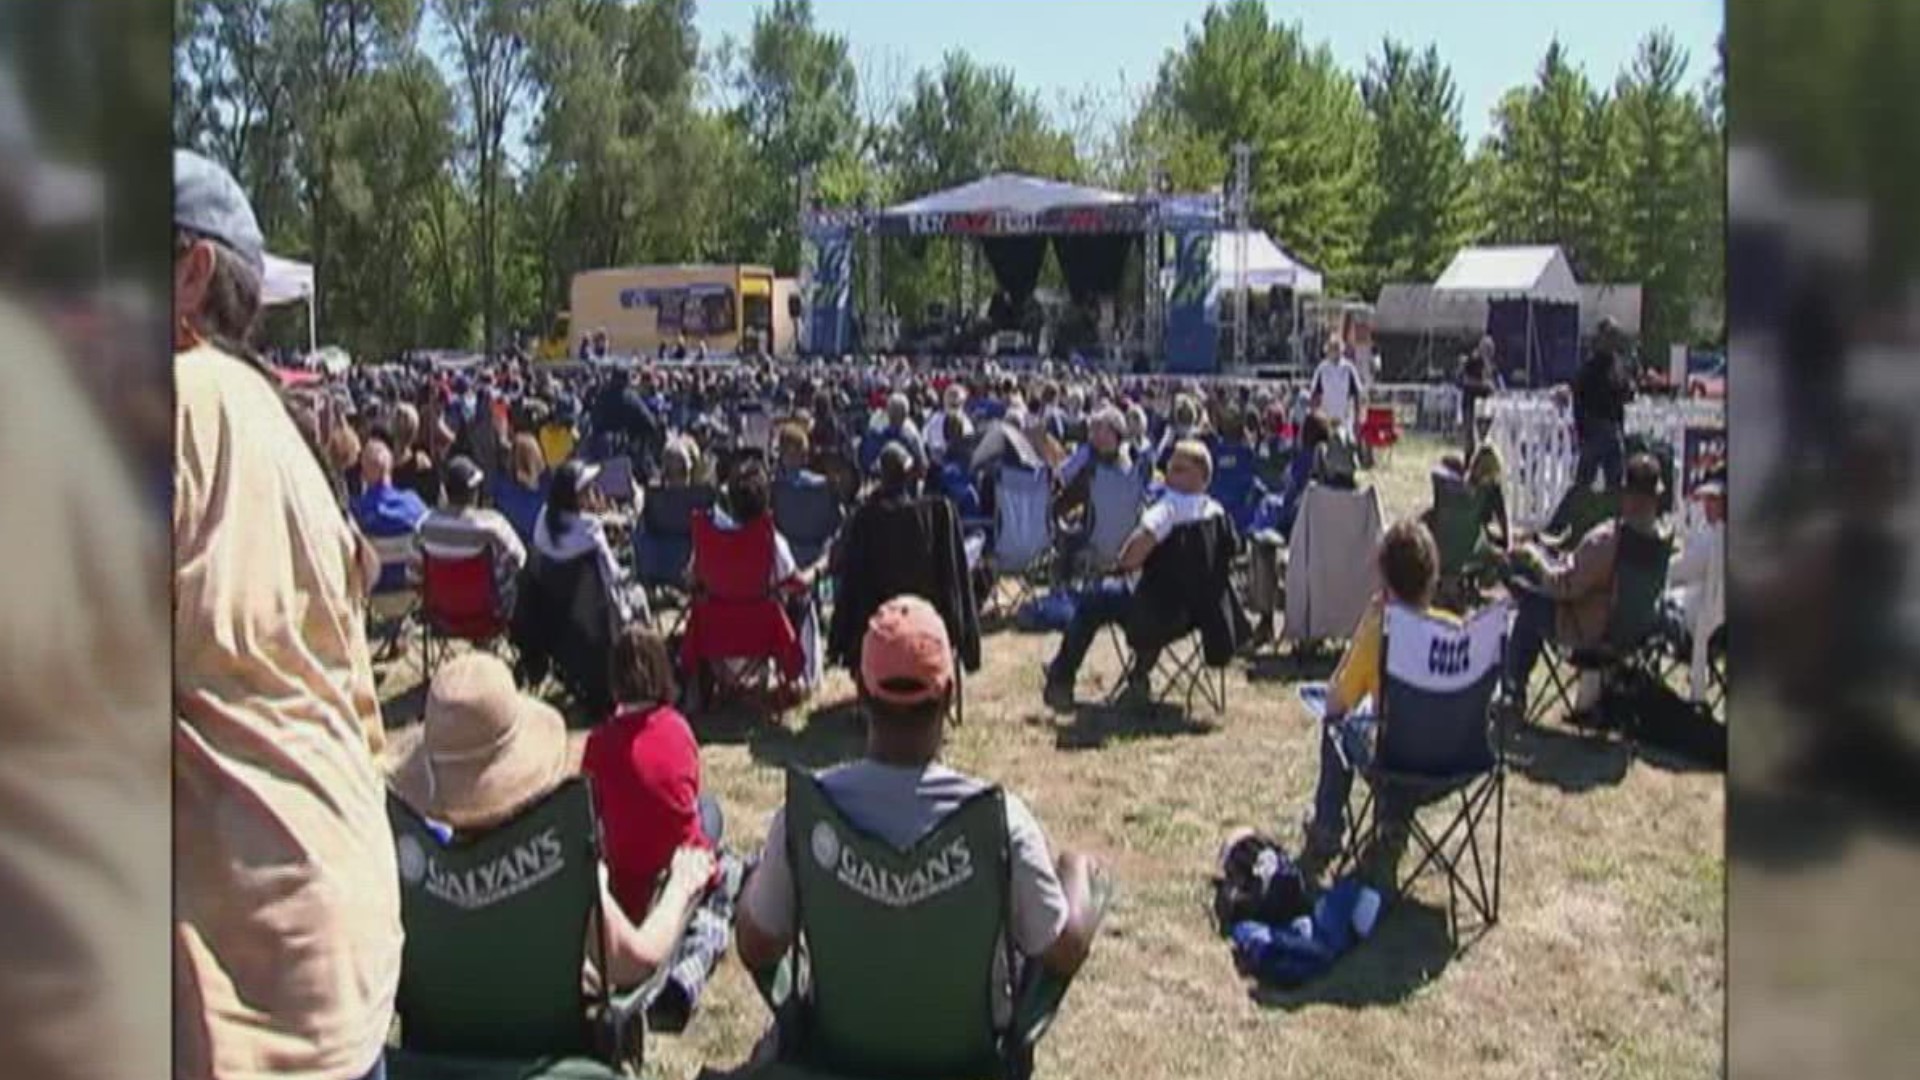 Indy Jazz Fest celebrates music history in Indianapolis